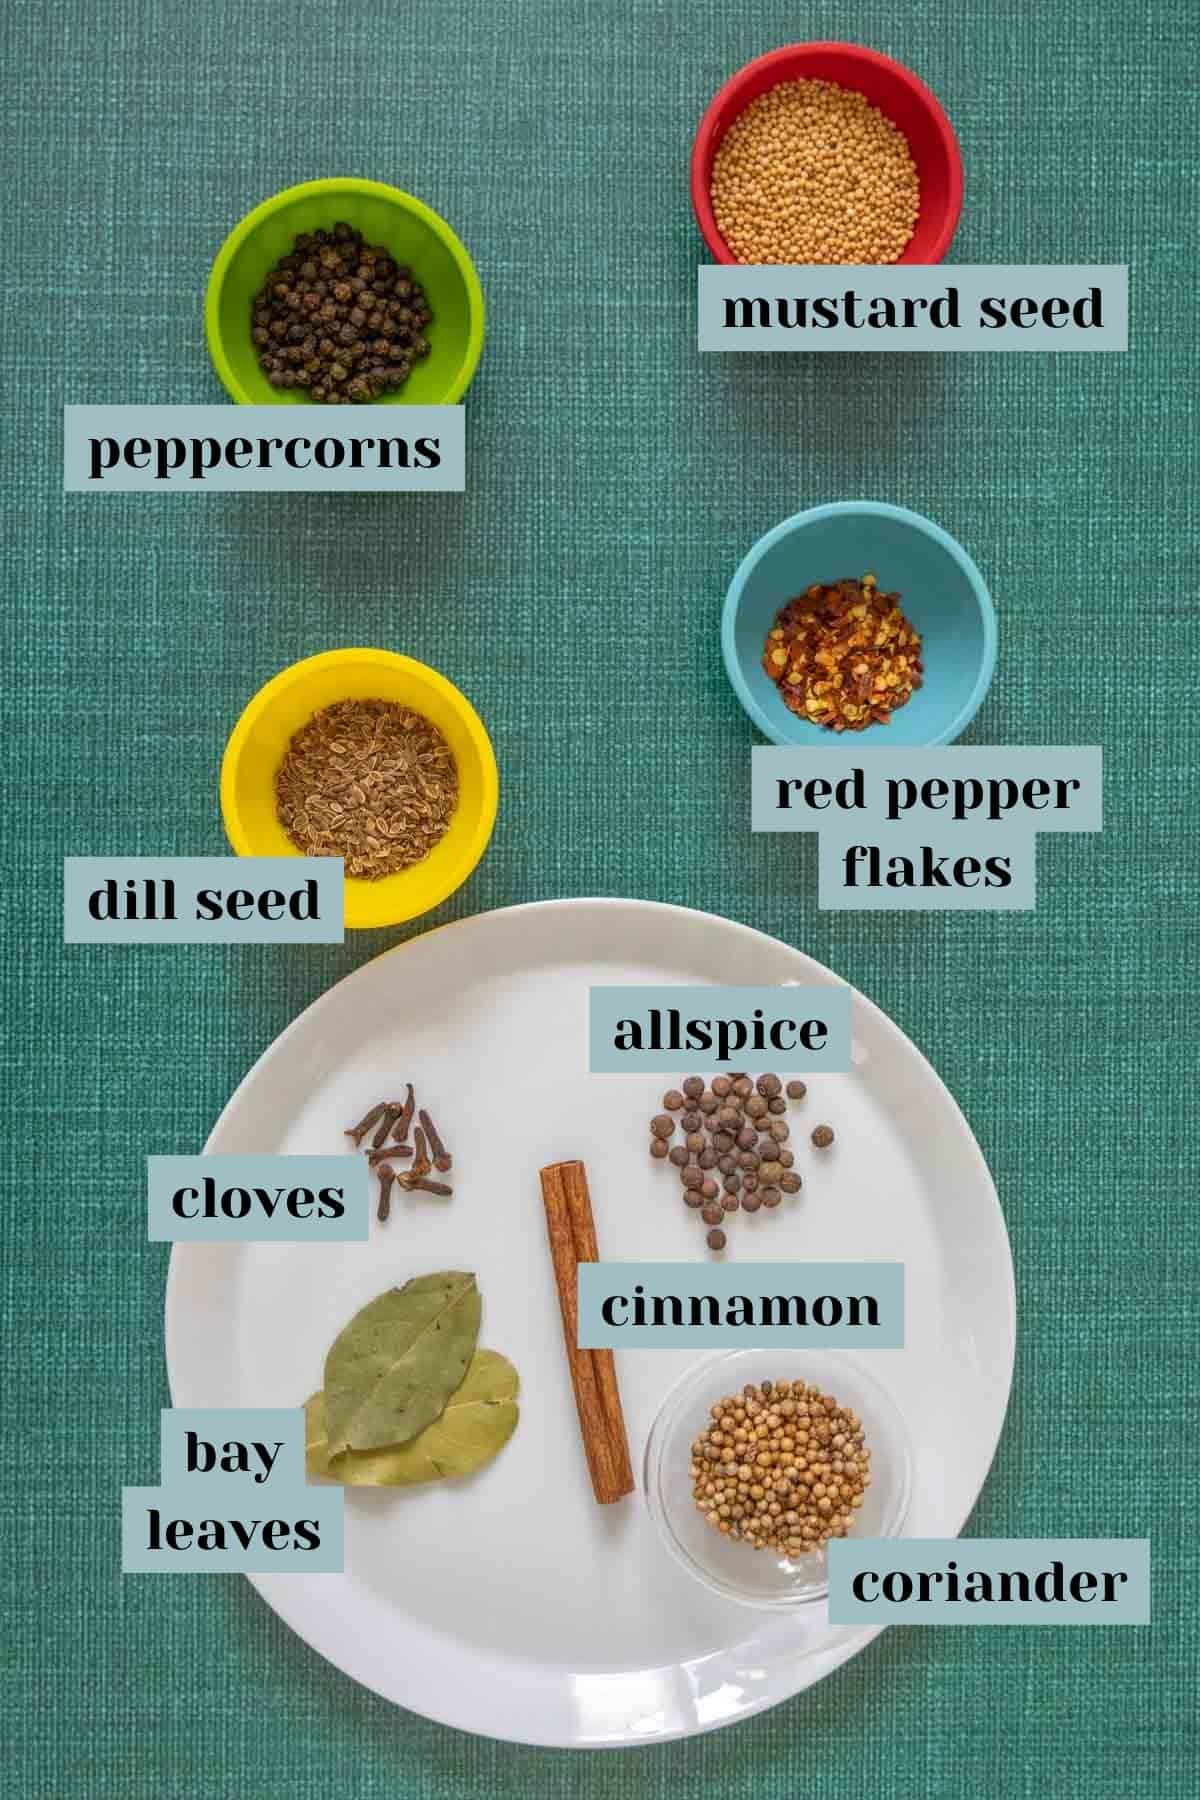 https://www.stetted.com/wp-content/uploads/2022/10/Pickling-Spice-Ingredients-Photo-Labeled.jpg